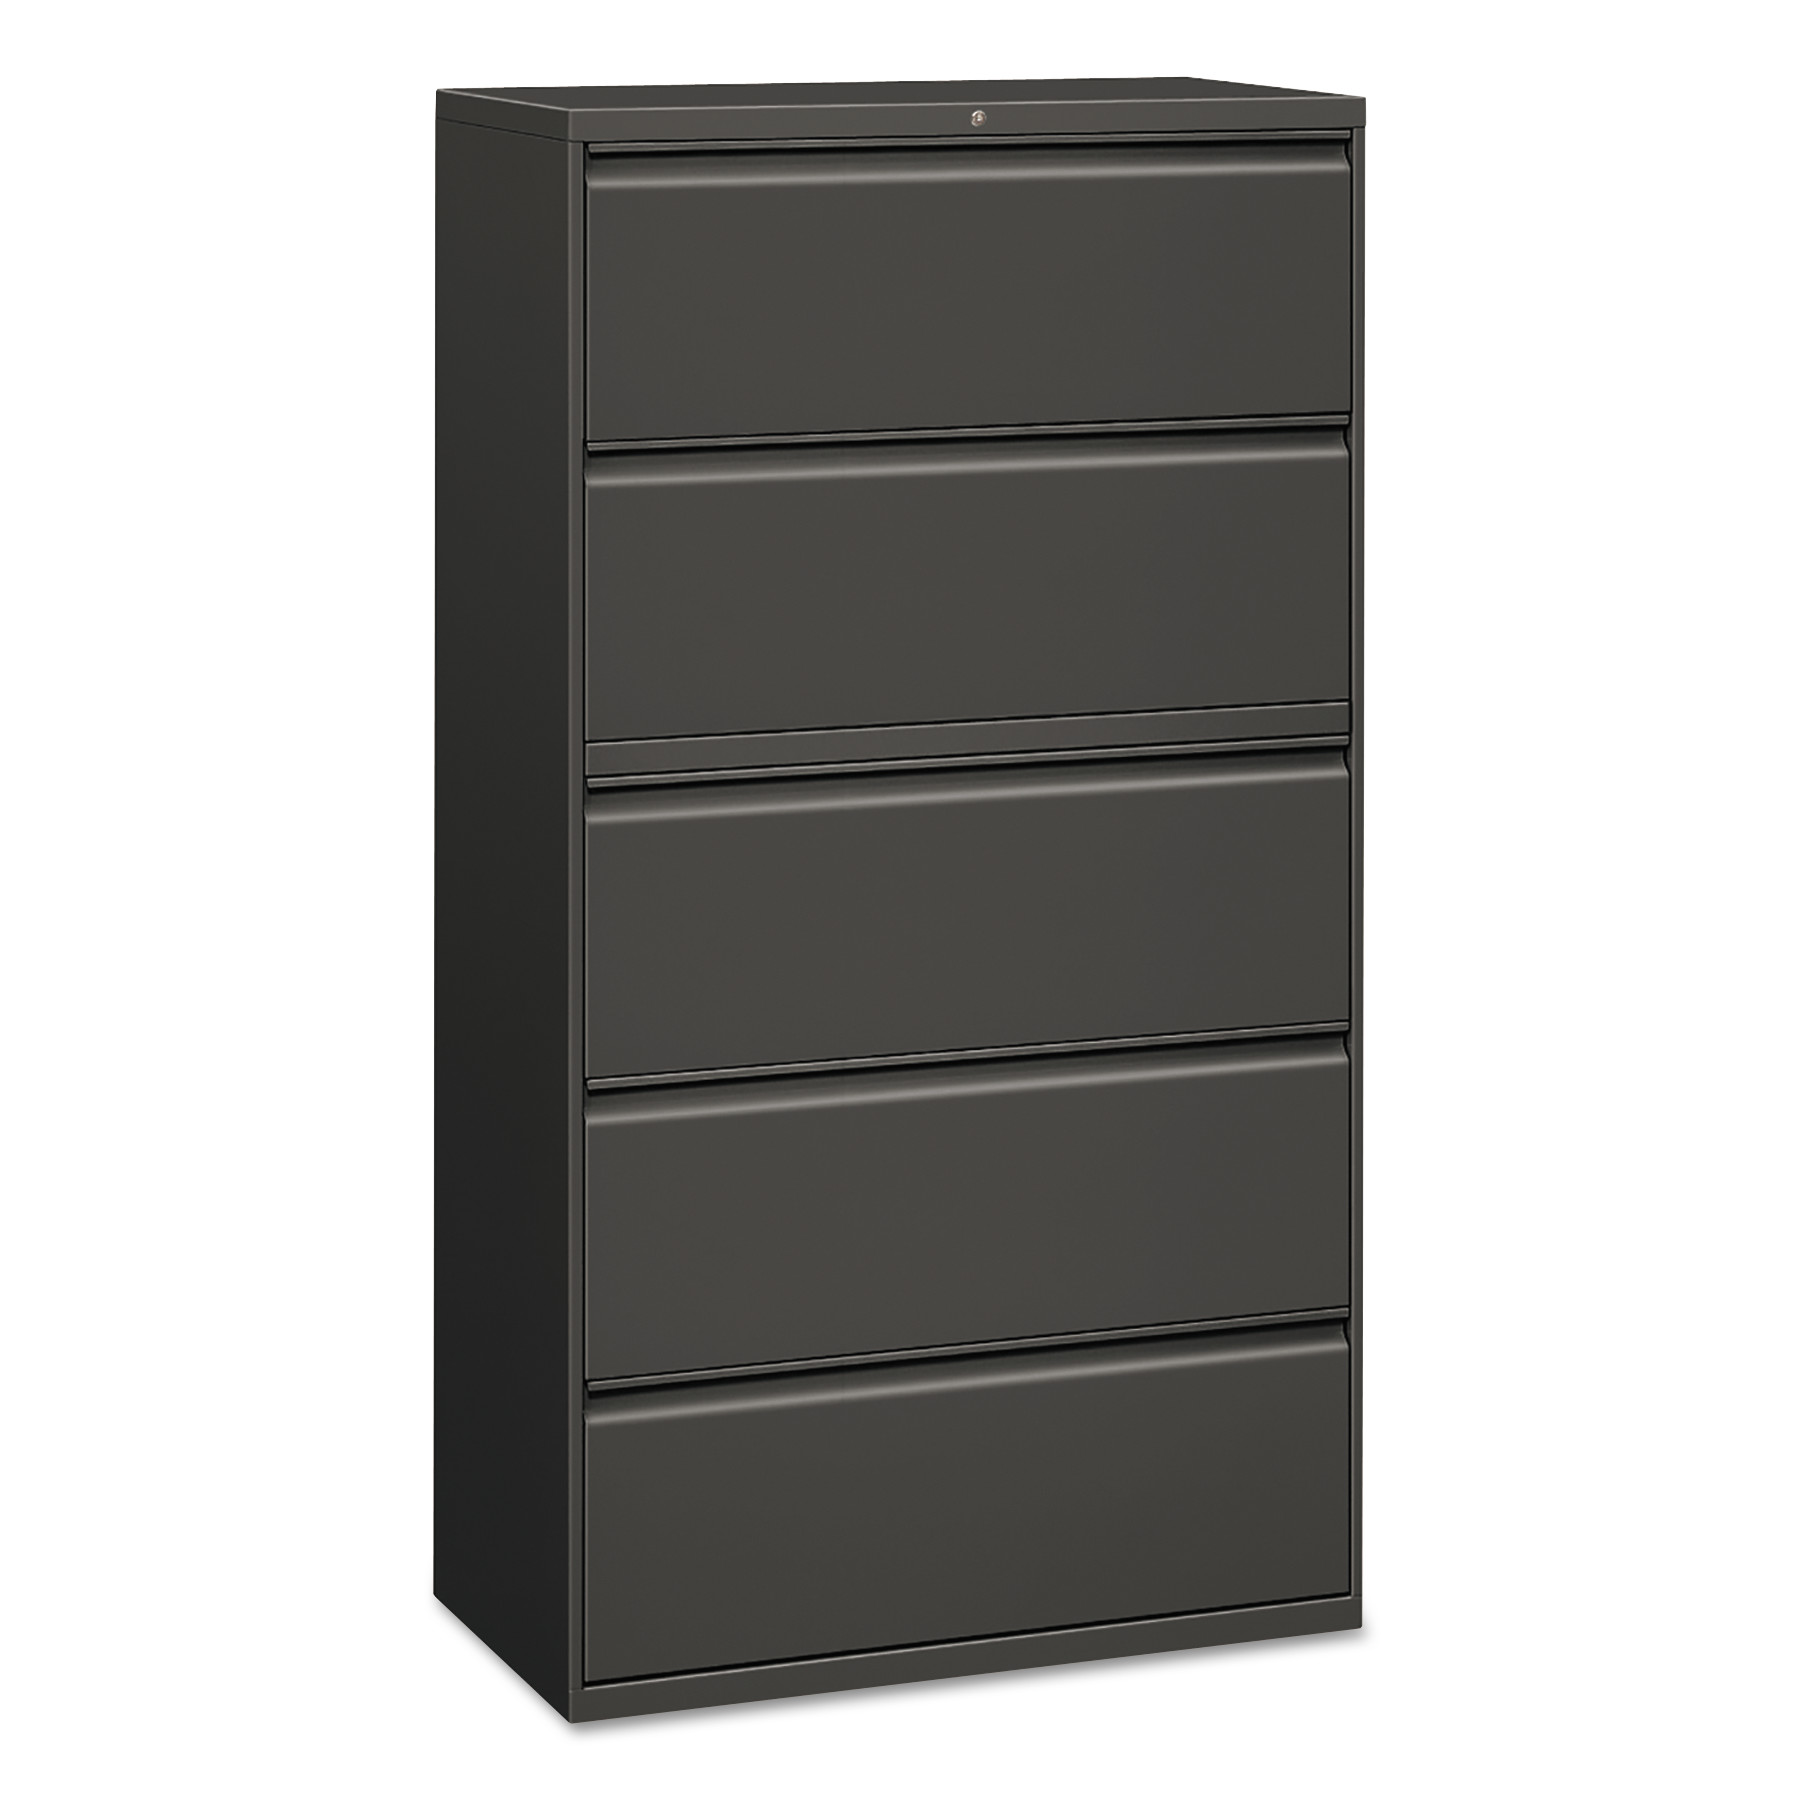 Five-Drawer Lateral File Cabinet, 36w x 18d x 64 1/4h, Charcoal